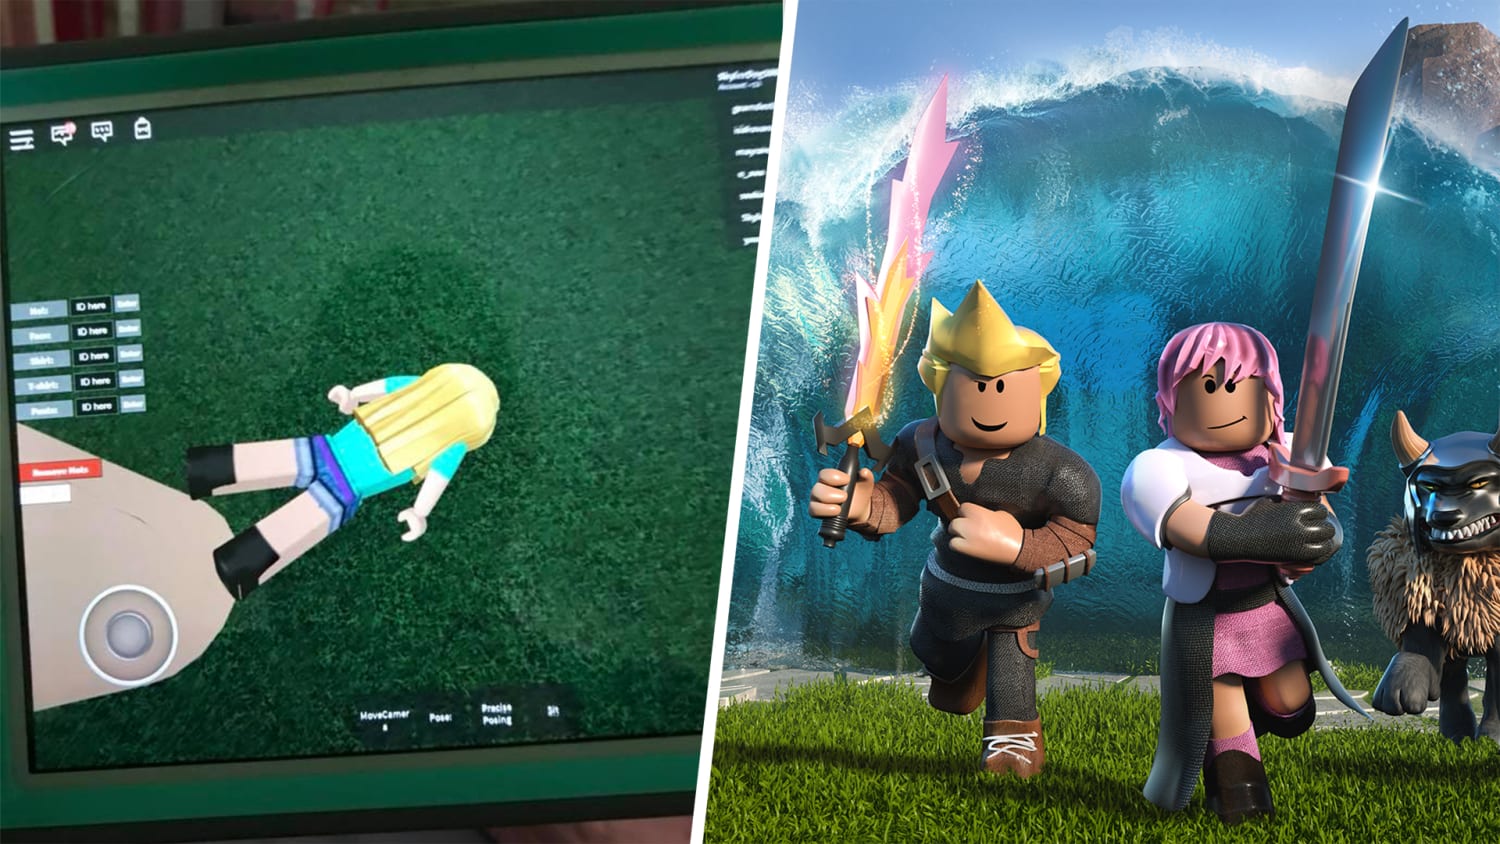 Roblox Pictures Not Showing